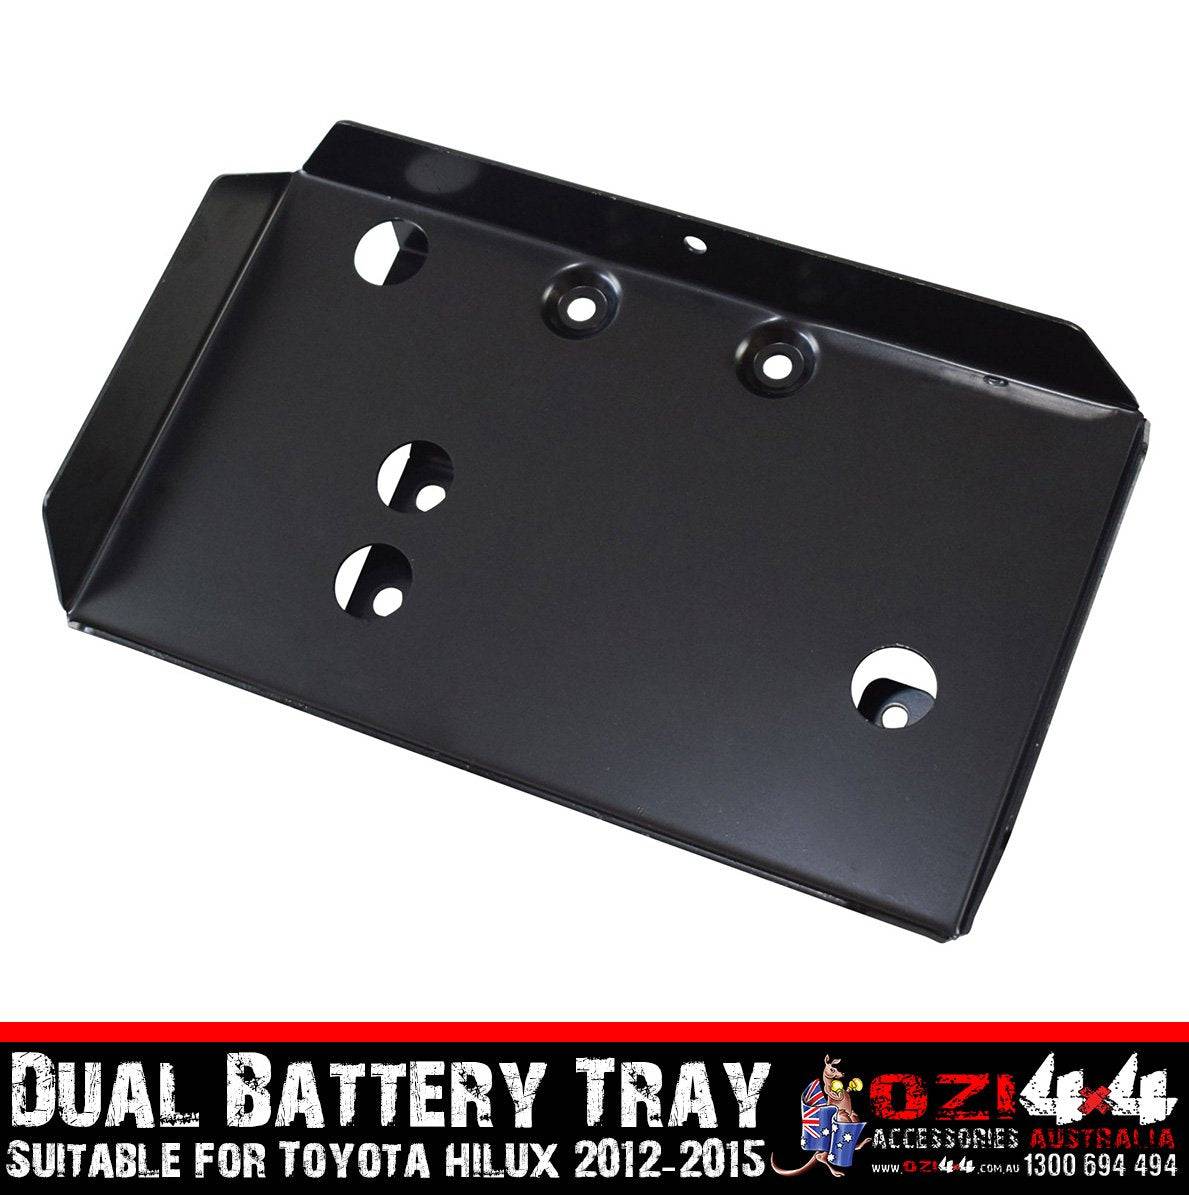 Black Dual Battery Tray Suits Toyota Hilux 2012-2015 (Online Only)